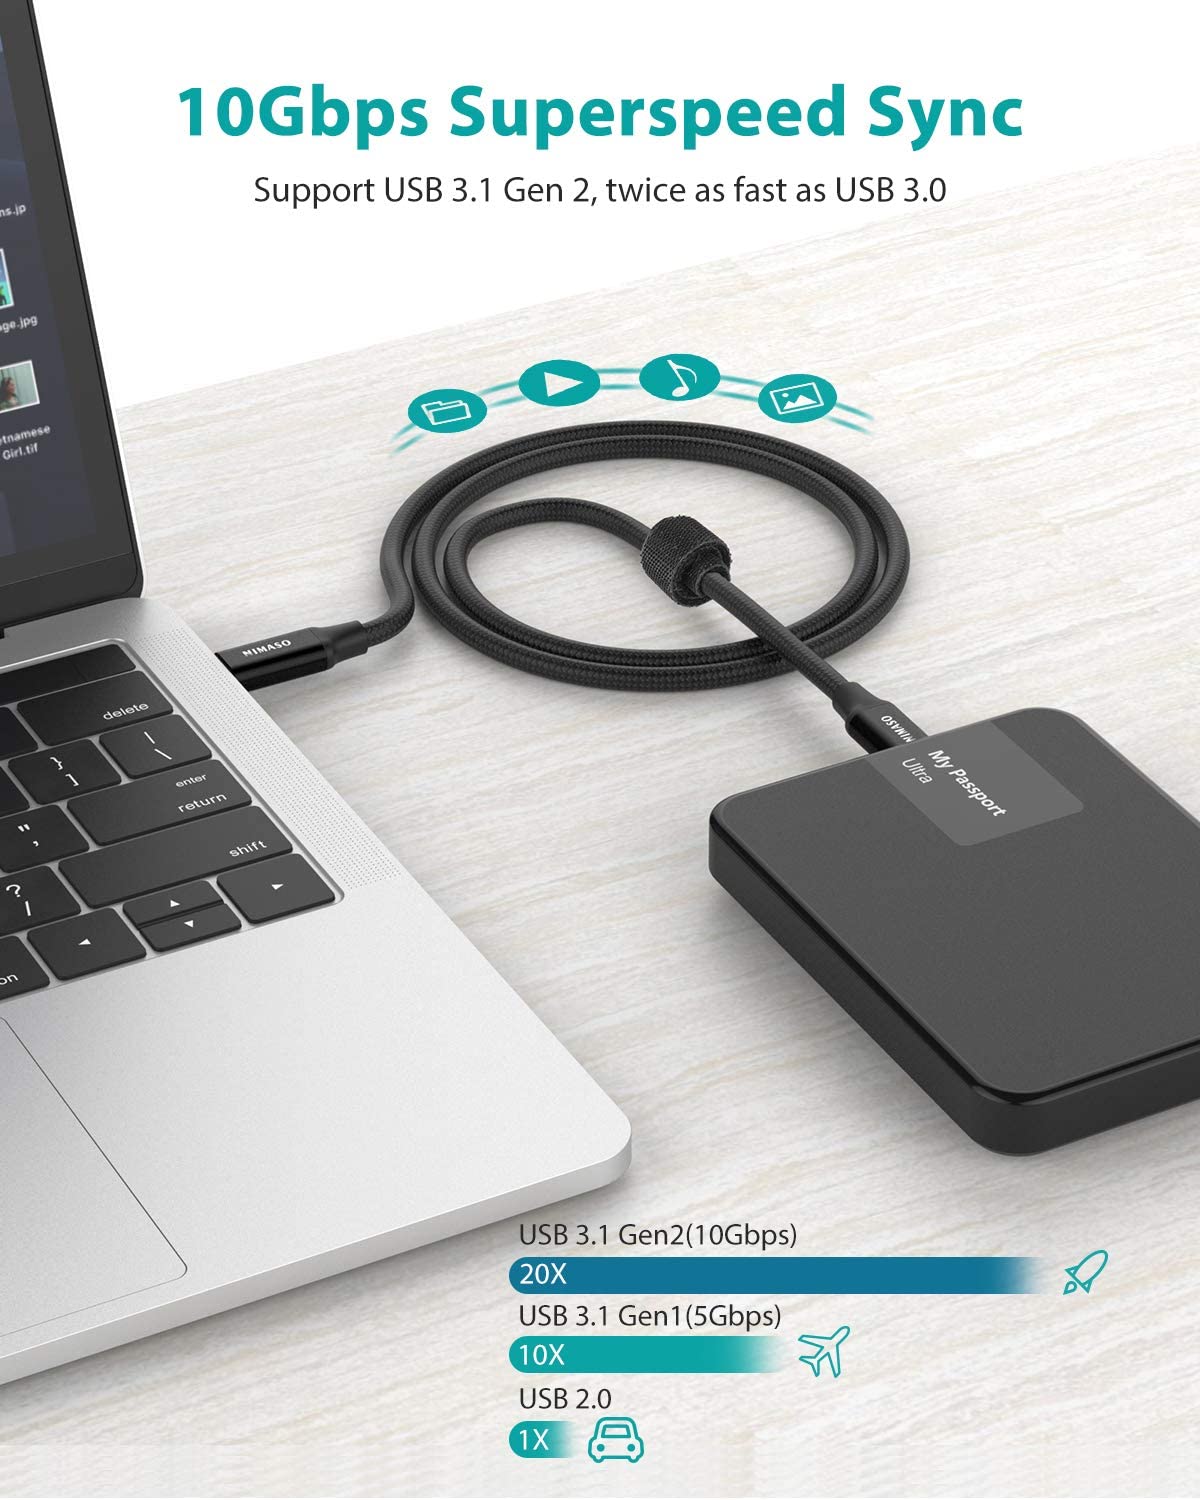 NIMASO USB C to USB C 3.1 Gen 2 Cable 10Gbps Data Transfer, 4K Video Output Monitor Cable 100W PD Fast Charging Compatible with Thunderbolt 3, MacBook Pro, iPad Pro, Galaxy S21, Google Pixel - 3.3FT